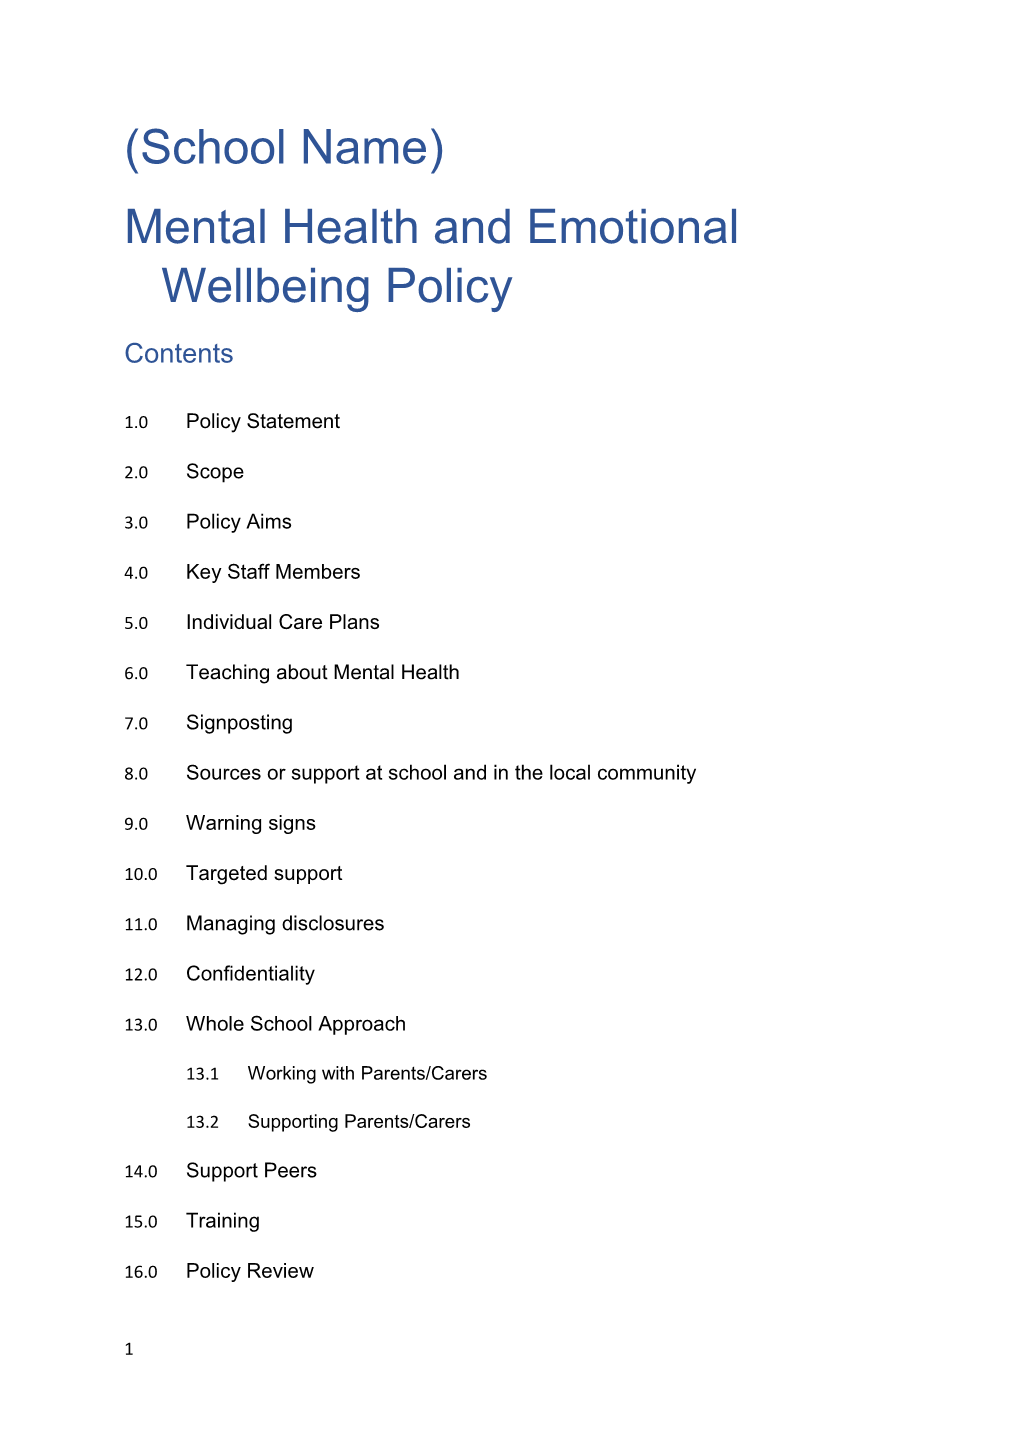 Mental Health and Emotional Wellbeing Policy